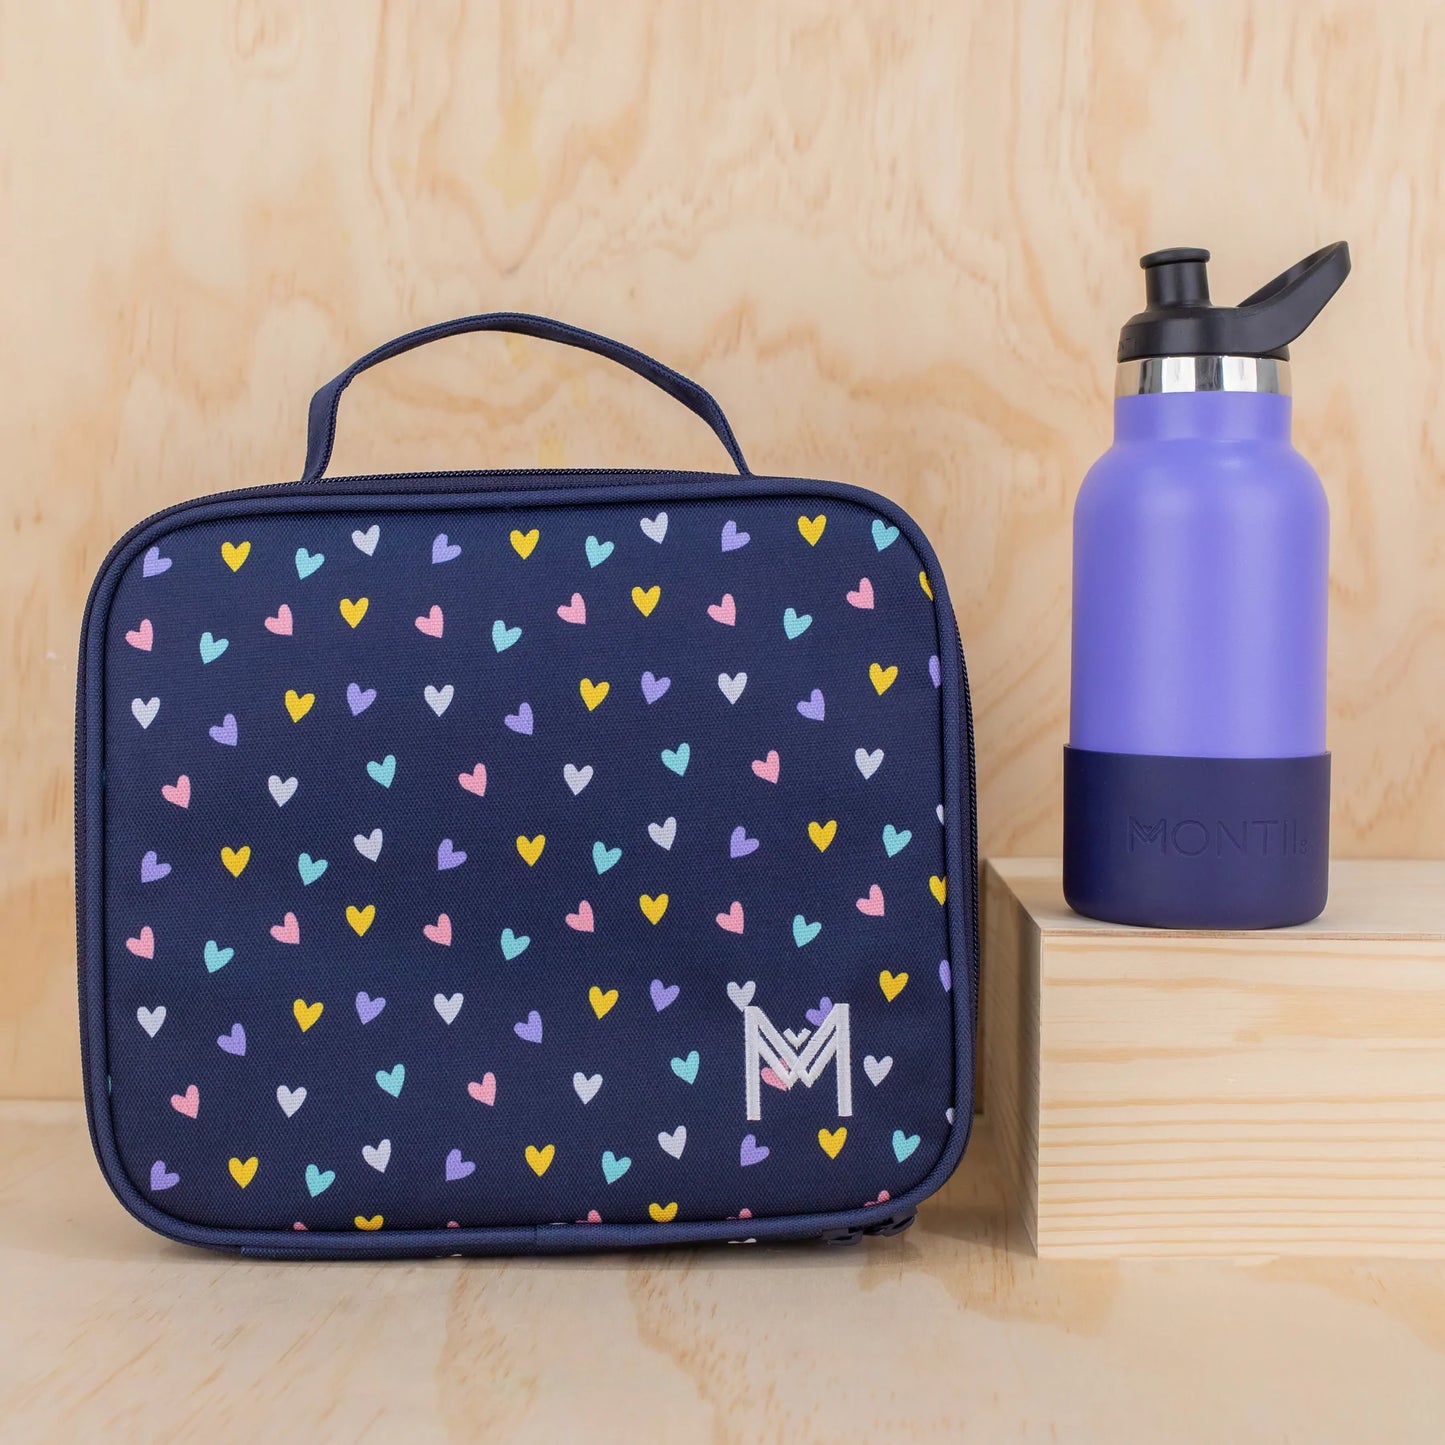 MONTIICO MEDIUM INSULATED LUNCH BAG - HEARTS